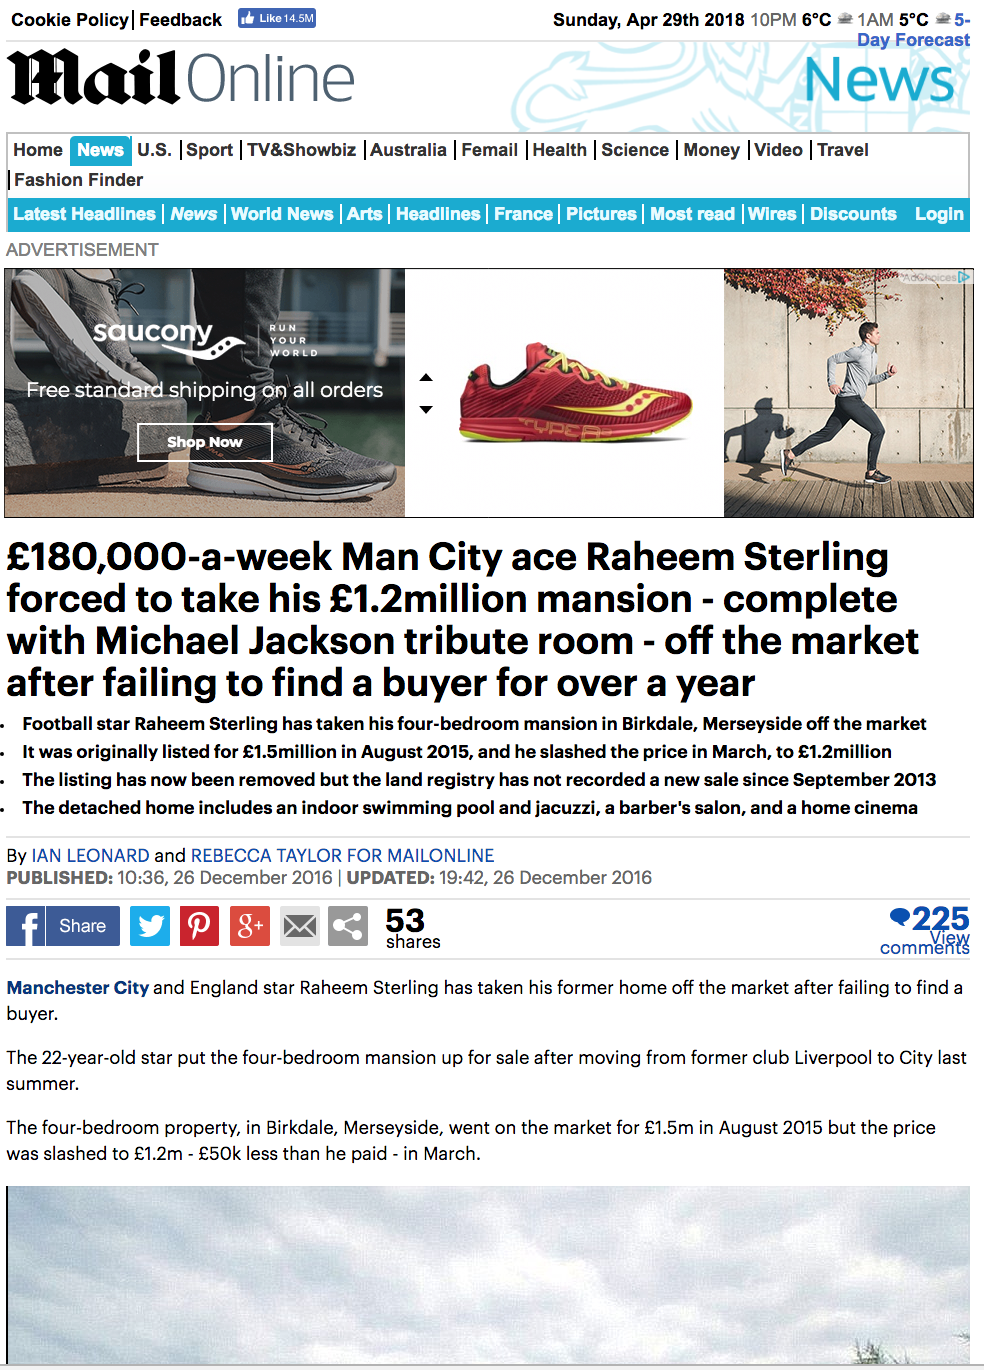 Mail Online: Sterling takes house off market